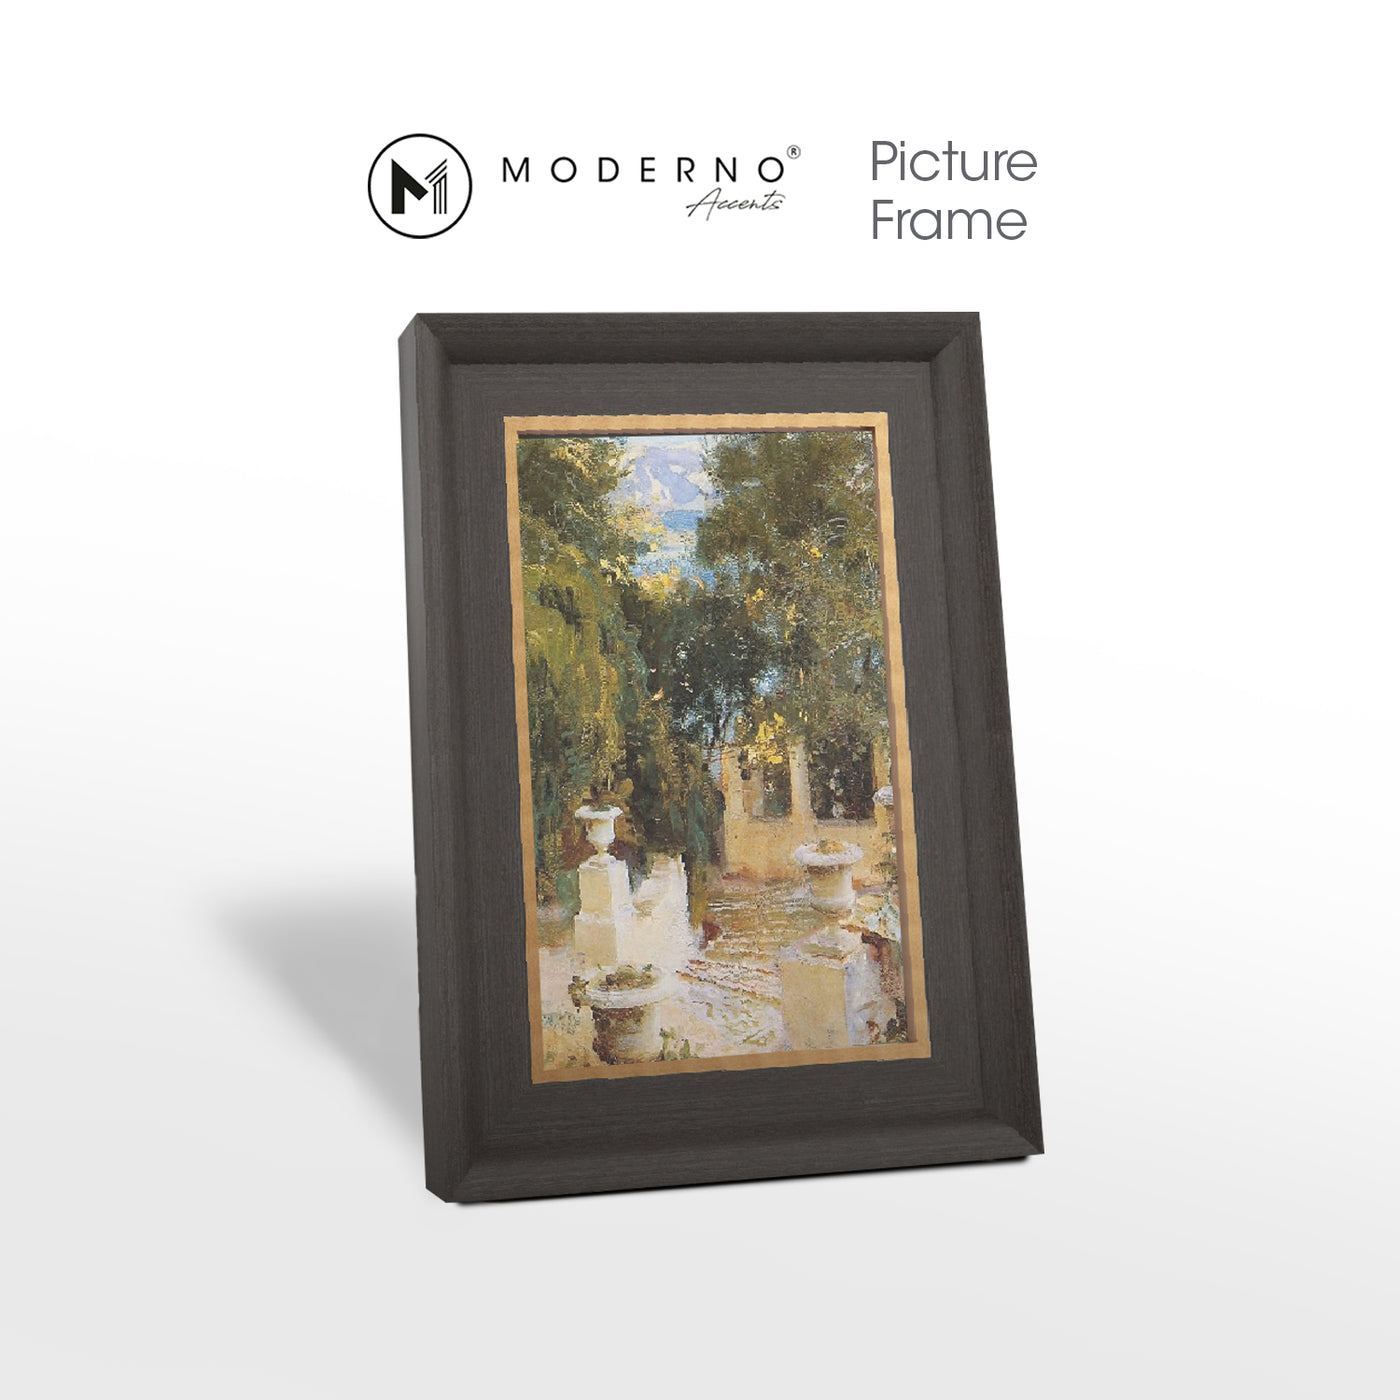 MODERNO Single Picture Frame - 2 Tone with Gold Side Photo Frame